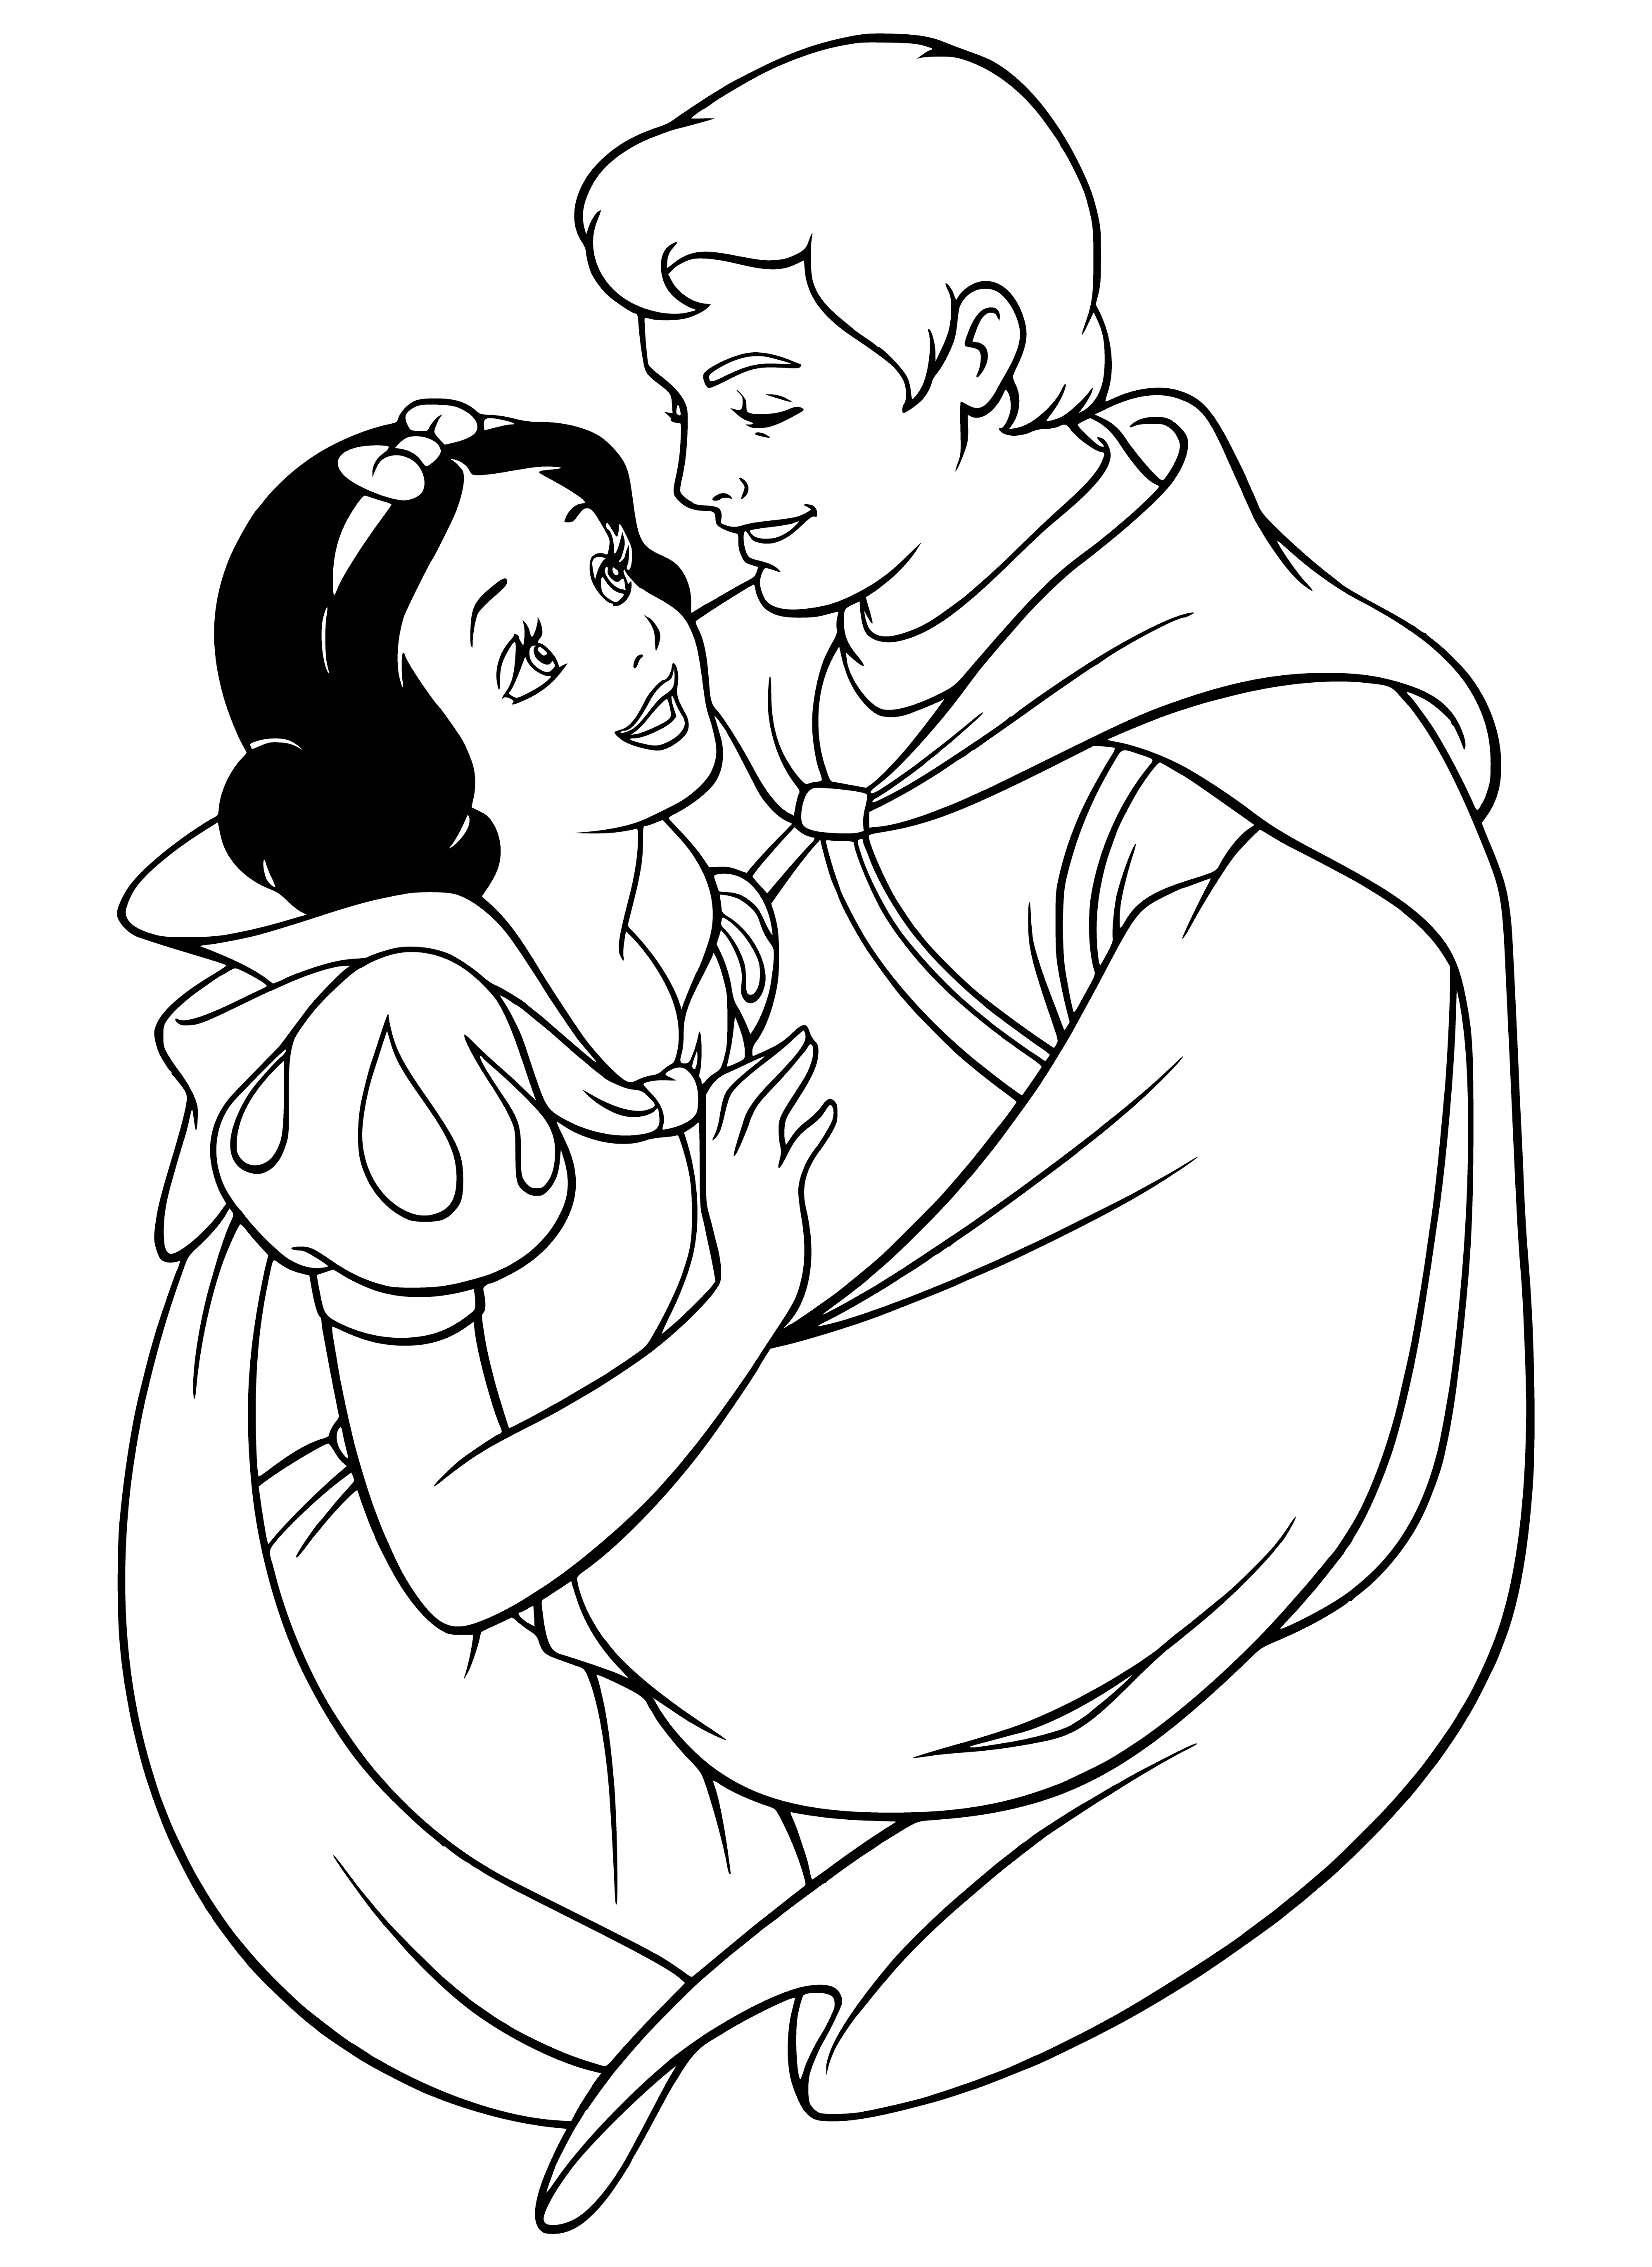 Prince and Snow White coloring page